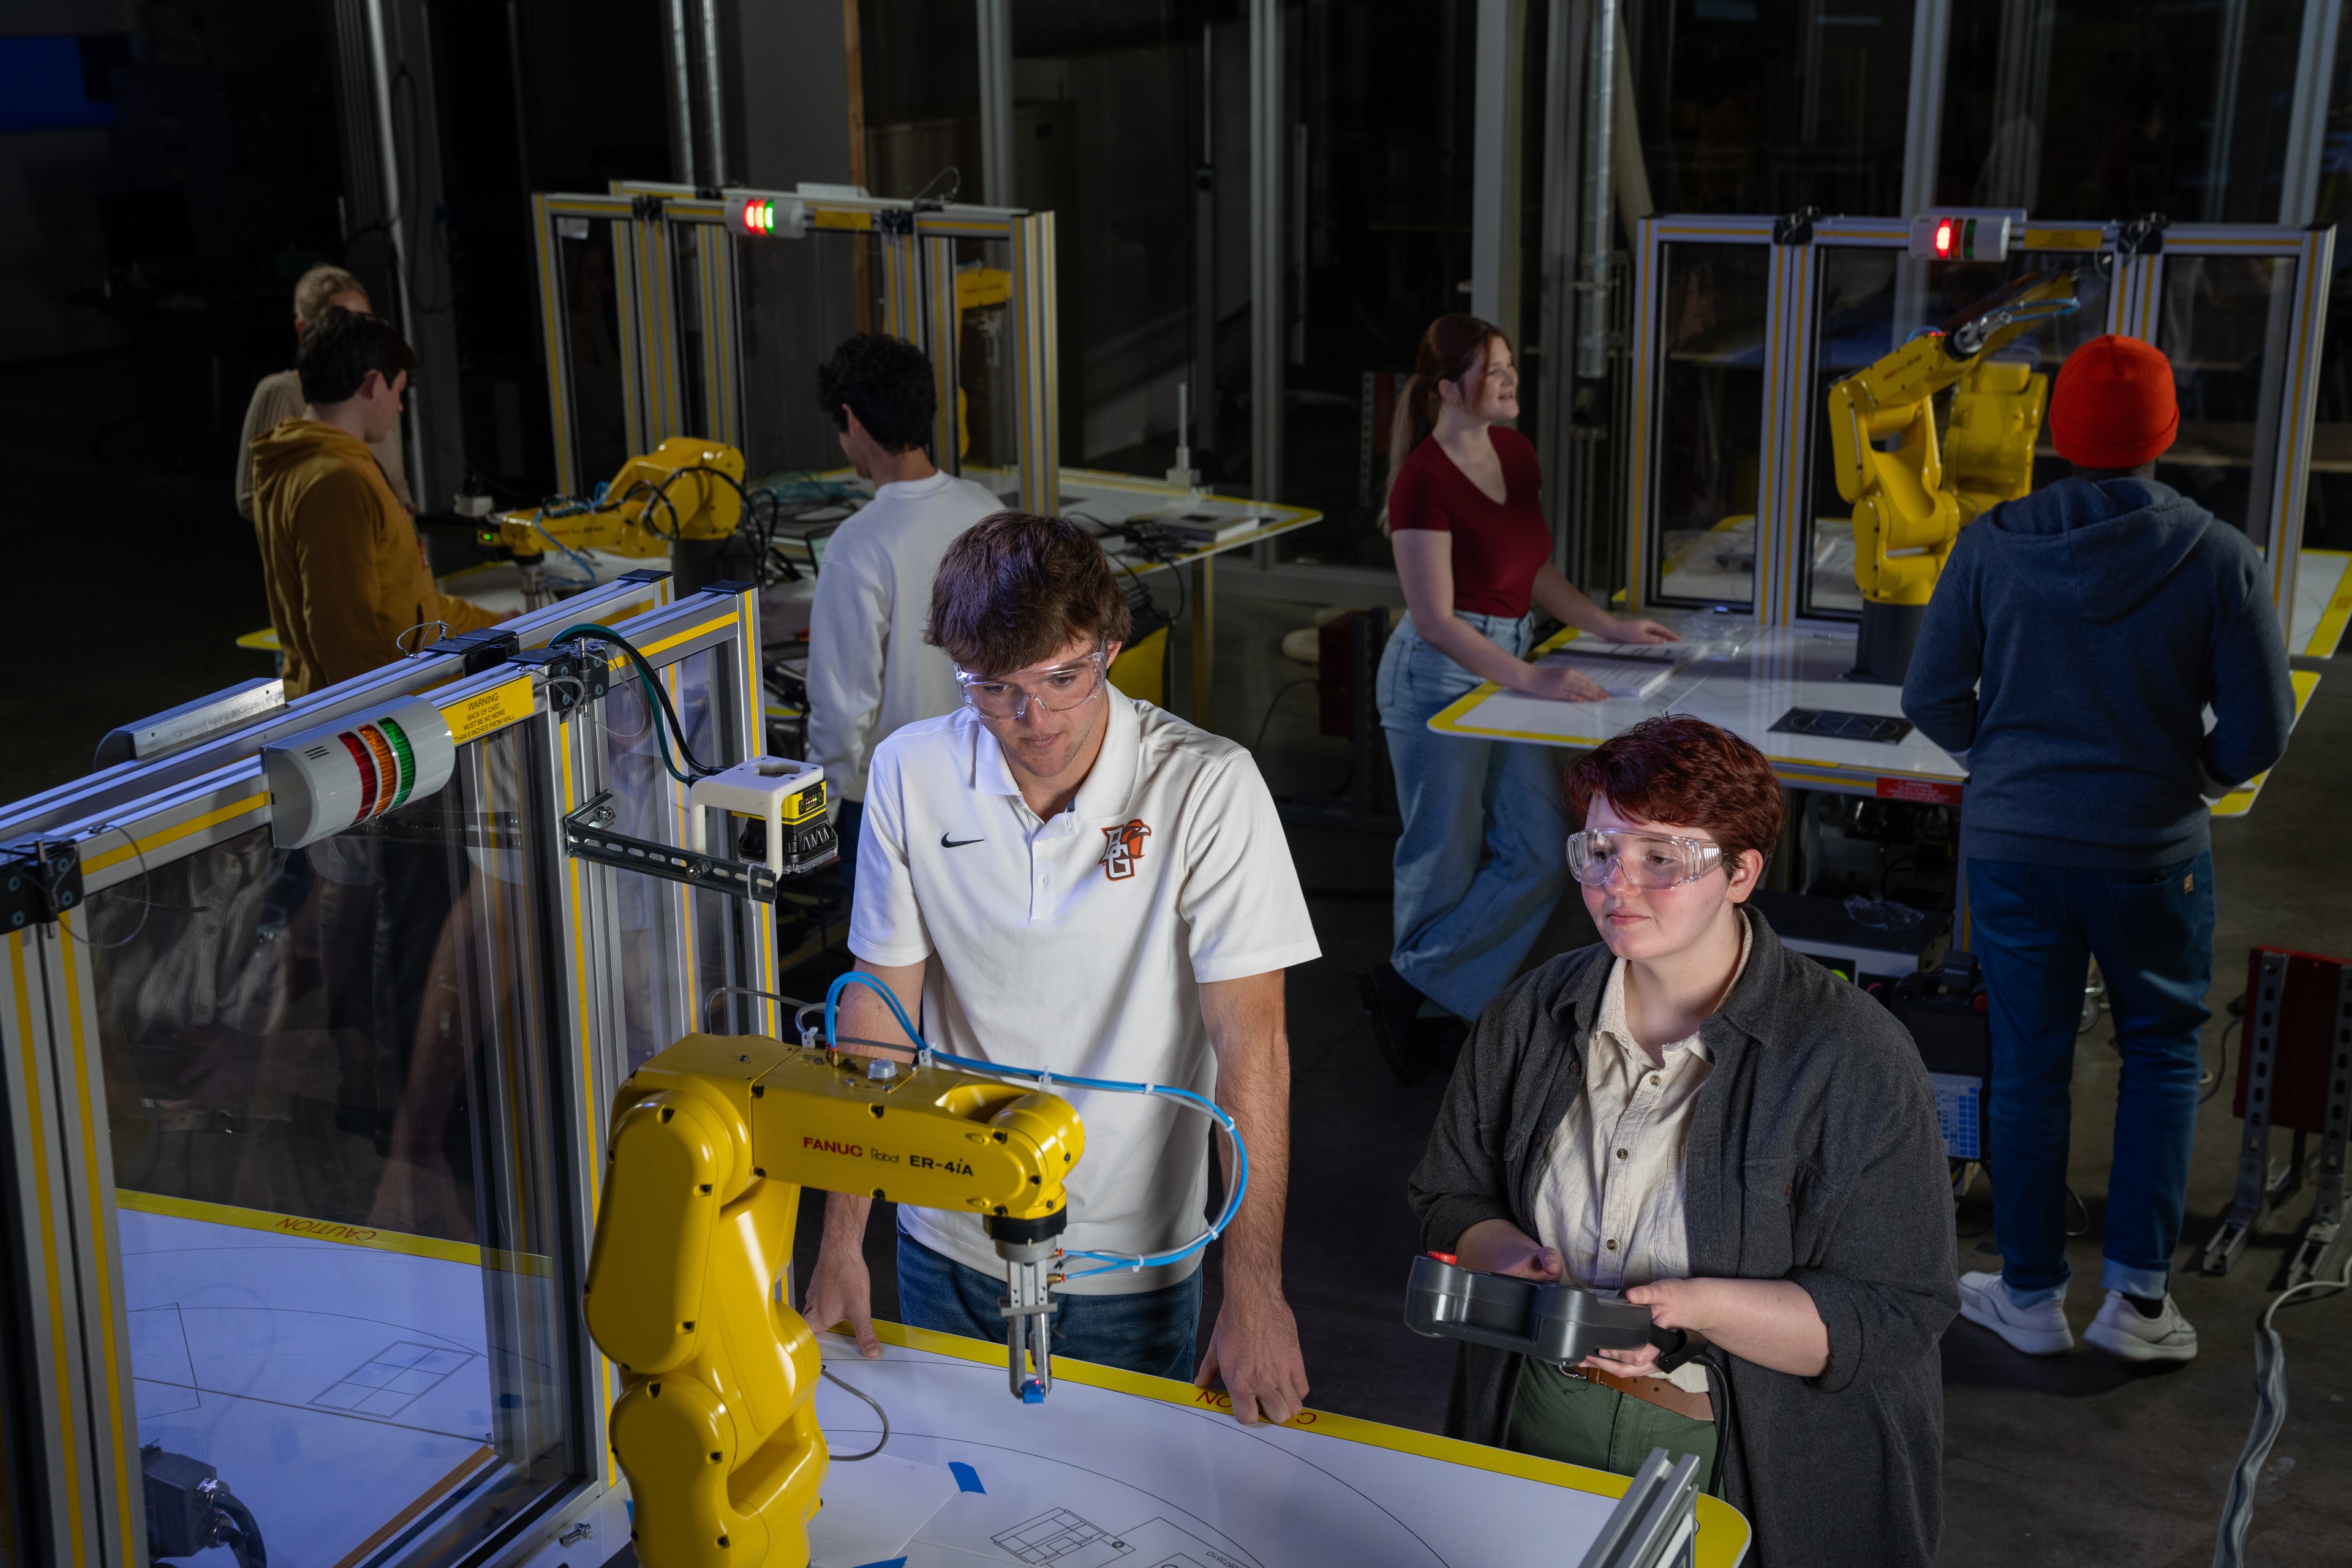 Students work on yellow manufacturing robots in a lab.